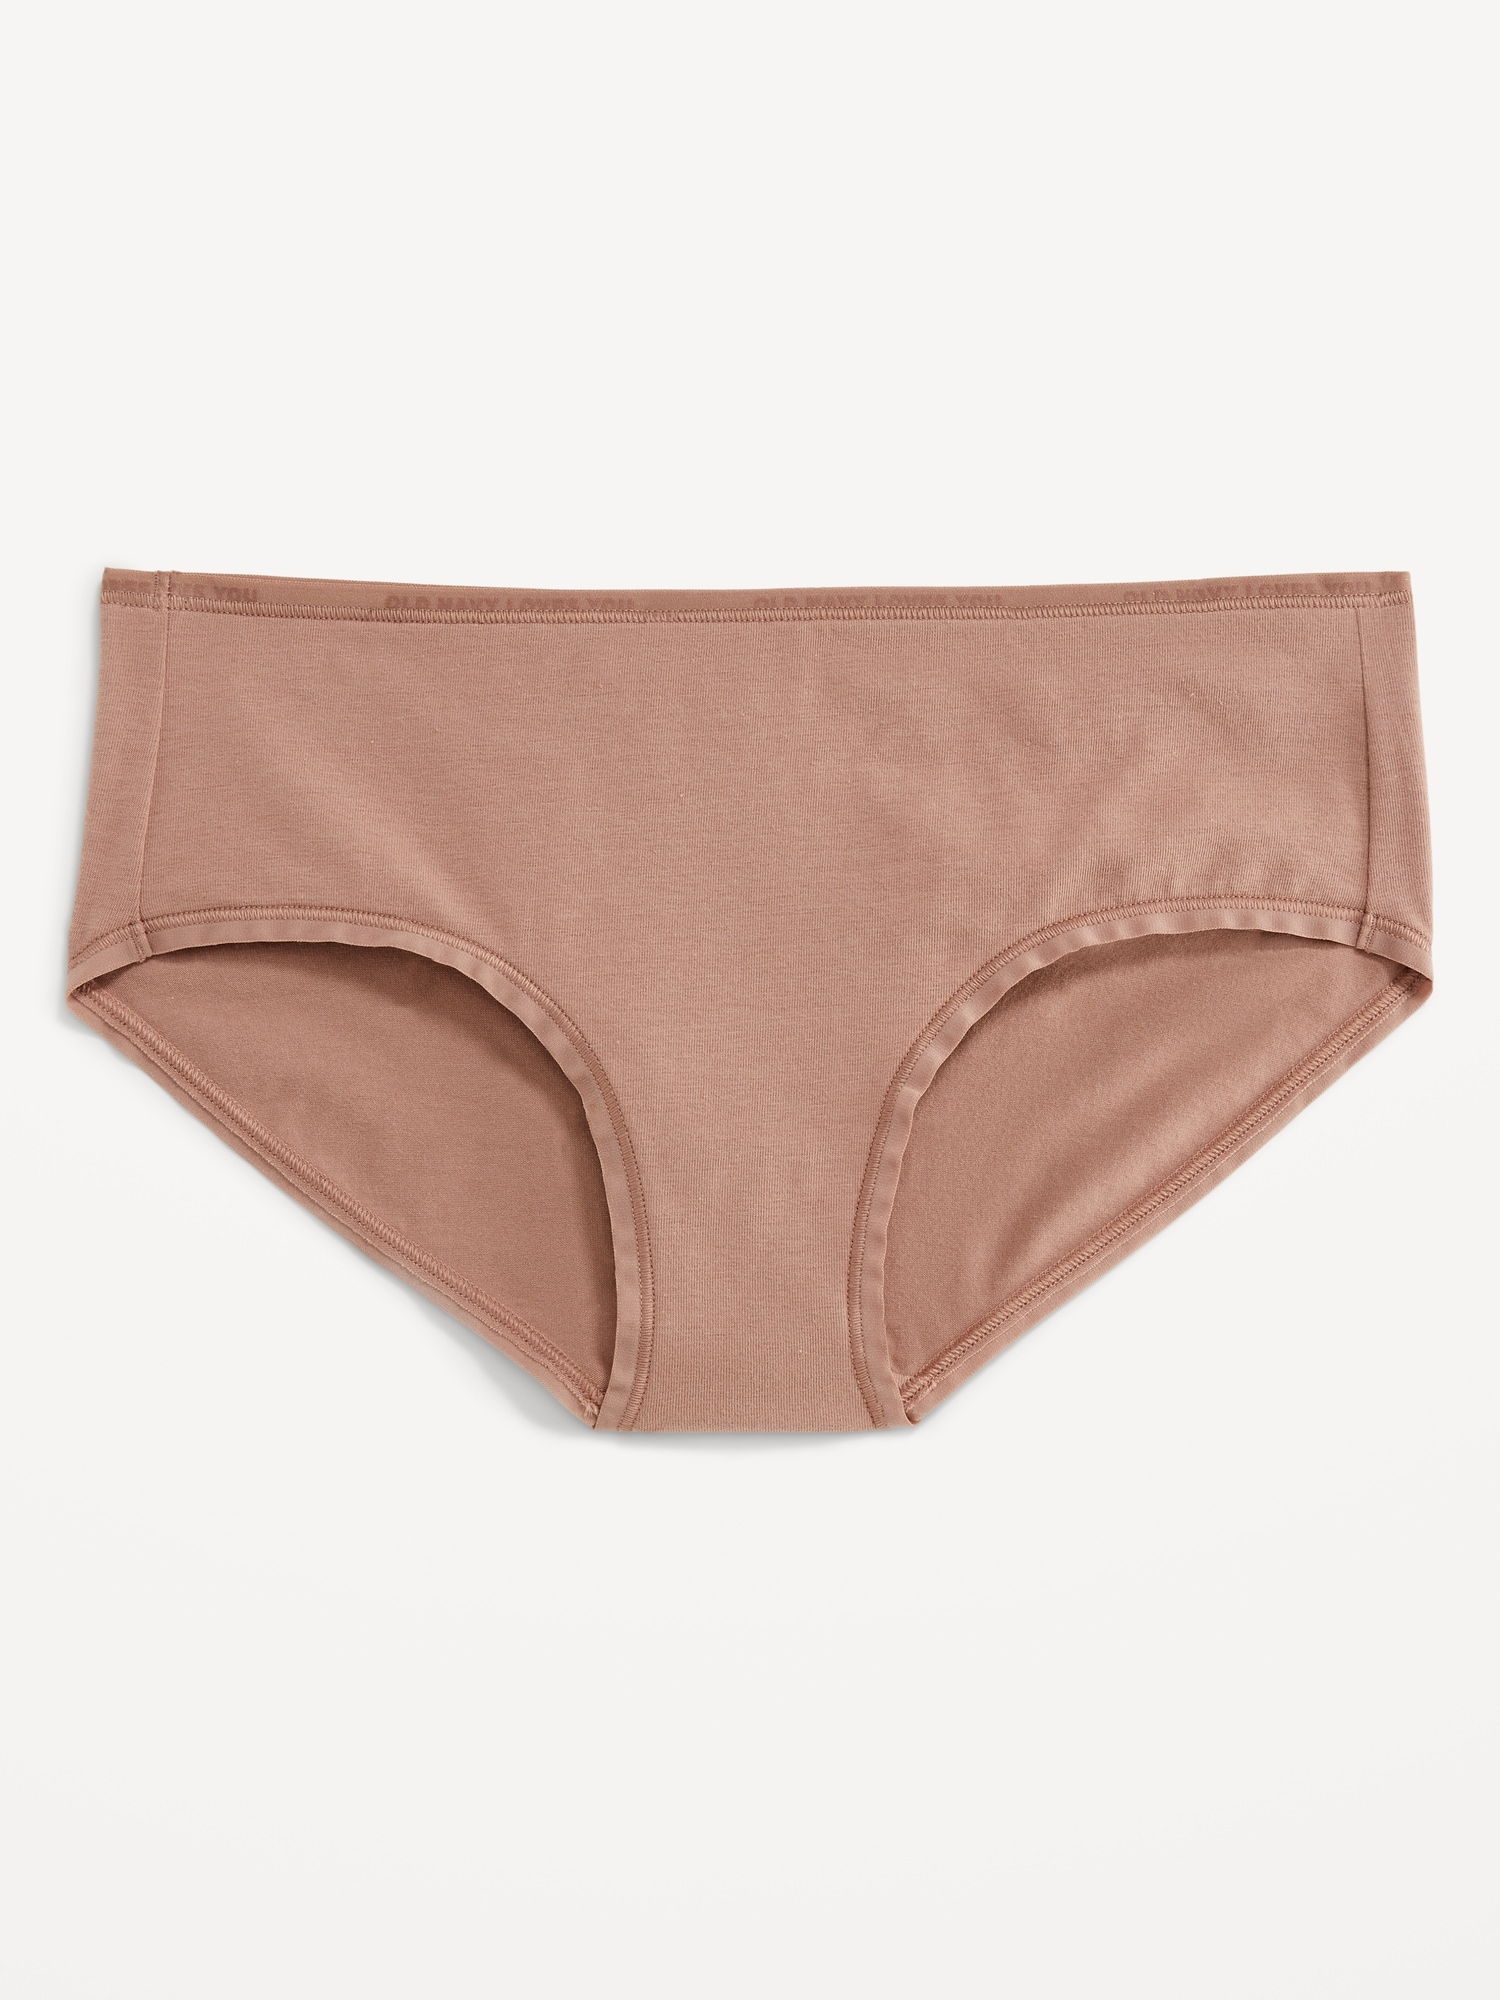 Old Navy Mid-Rise Logo Graphic Hipster Underwear for Women brown. 1